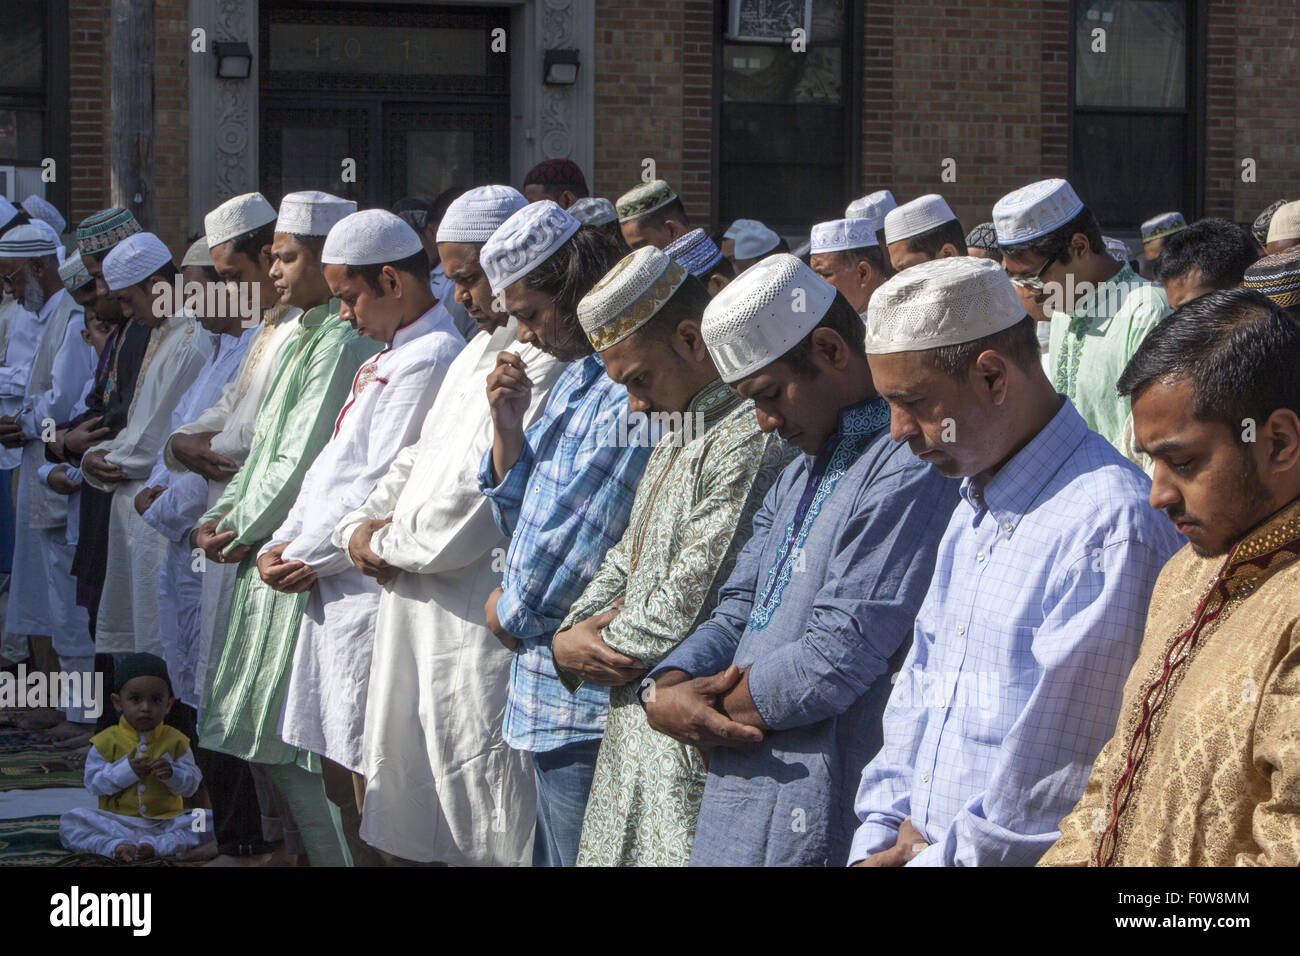 Muslims pray outside a mosque in Kensington, Brooklyn, NY for 'Eid al-Fitr.' The holiday,celebrated around the world, marks the Stock Photo